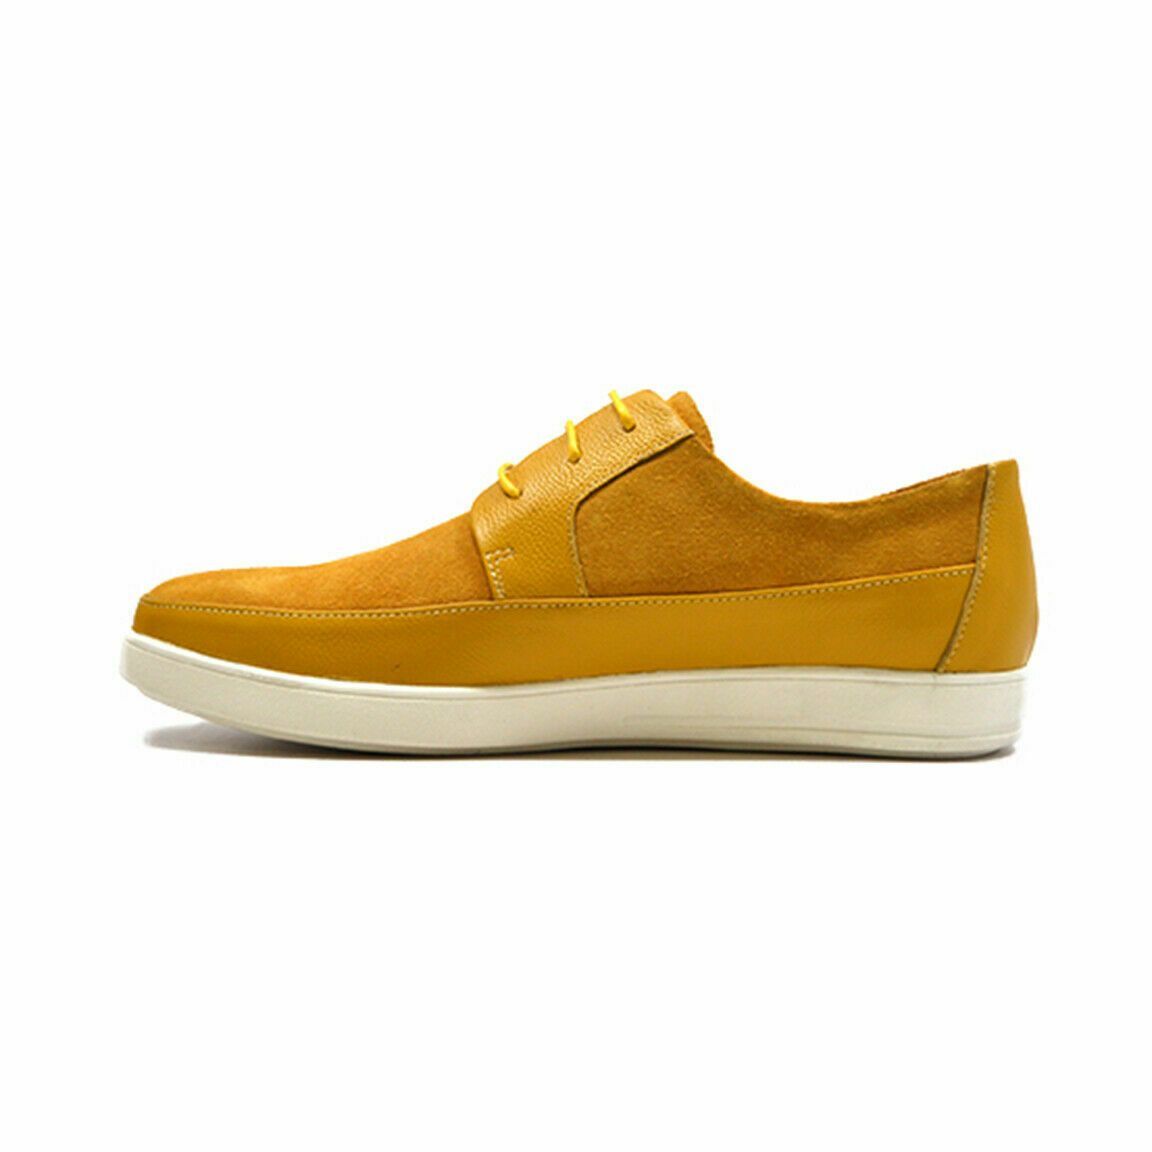 British Walkers Westminster Men's Yellow Leather/Suede Bally Style ...